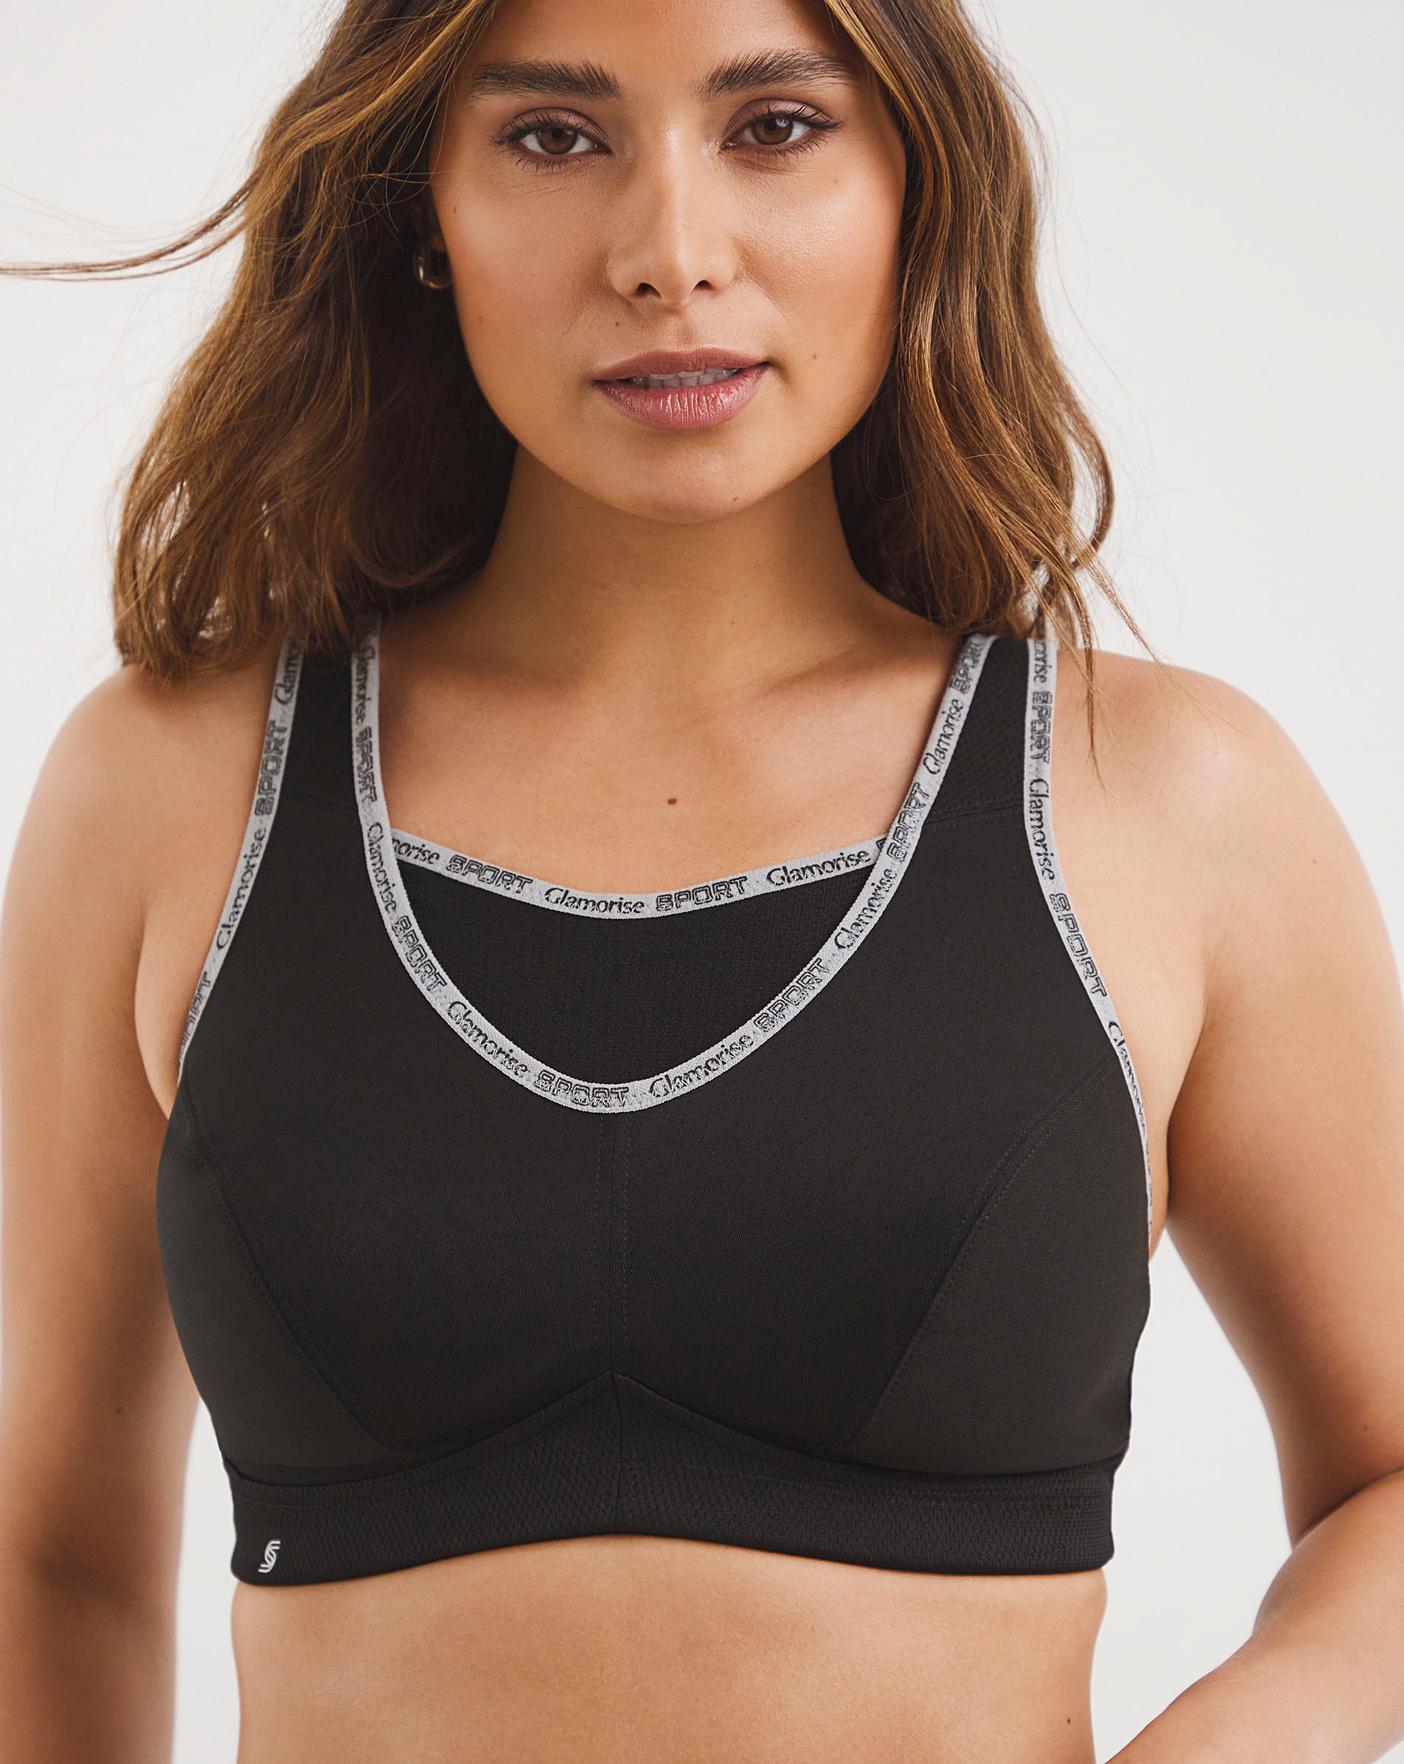 Glamorise 'No Bounce' Sports Bra for larger chests and plus size women